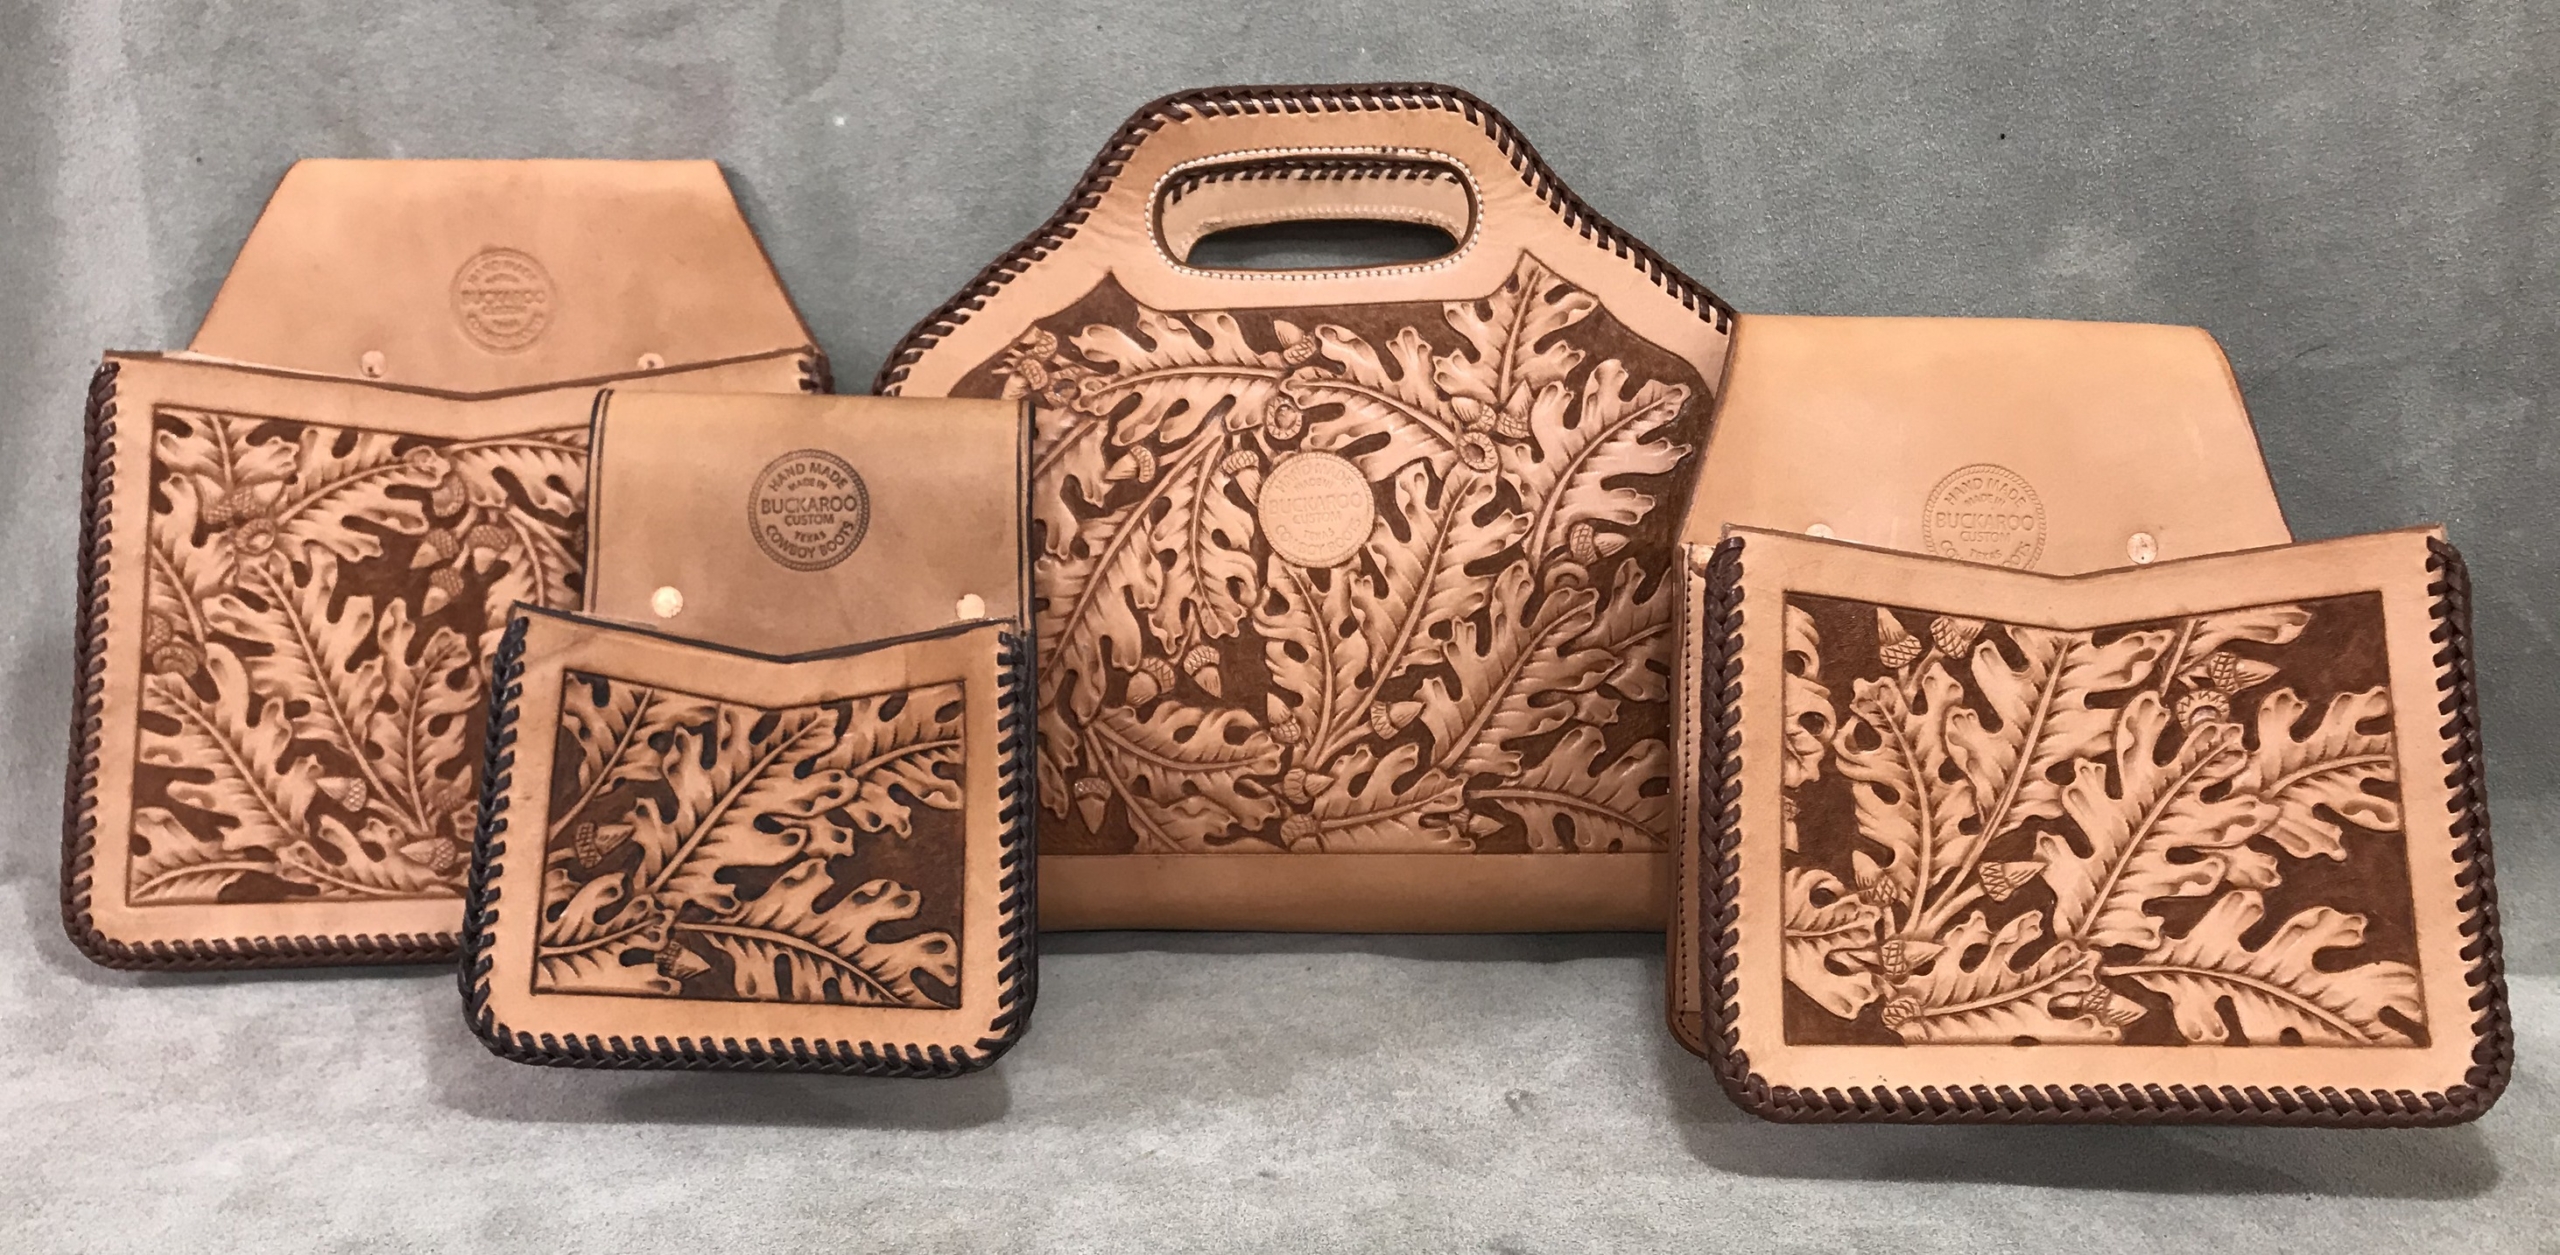 Los Vaqueros Saddlery by Bruce Bowers "Shooting Sports" bag.